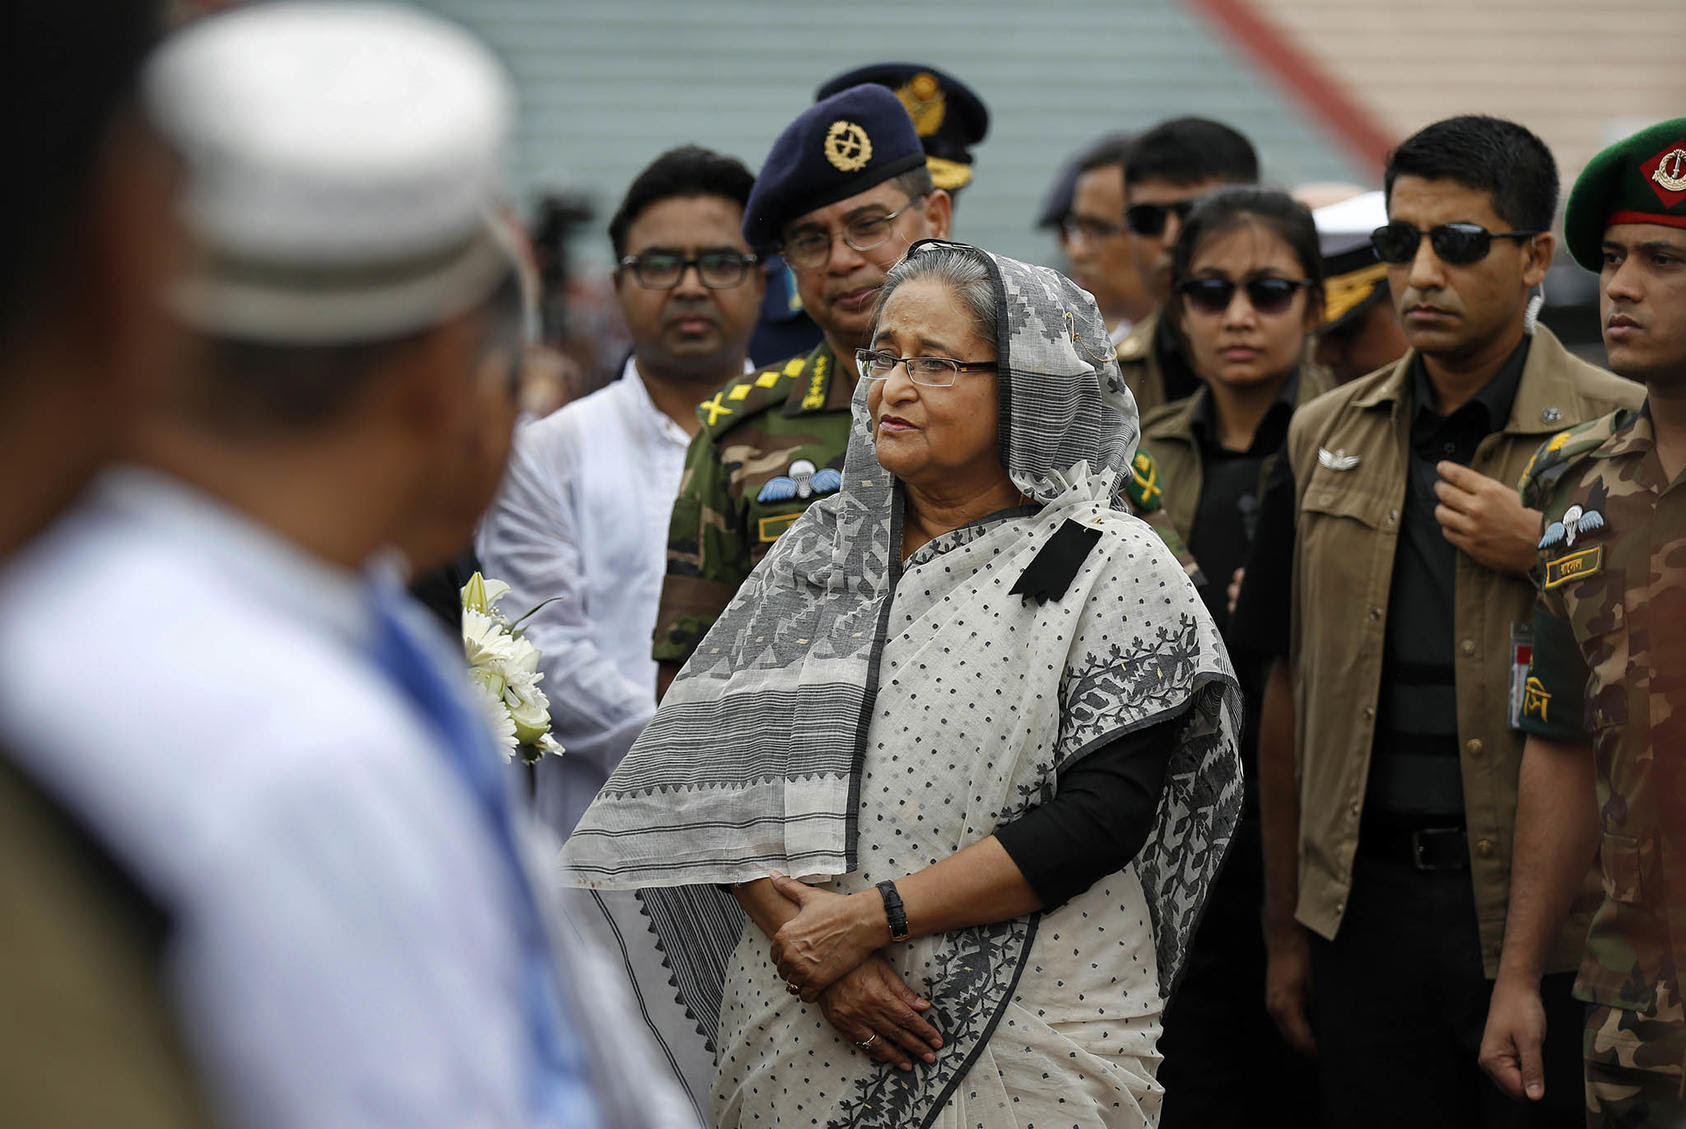 Prime Minister Sheikh Hasina speaks with family members at a memorial service on July 4, 2016, for victims of the Holey Artisan attack three days before. (Photo by AP)